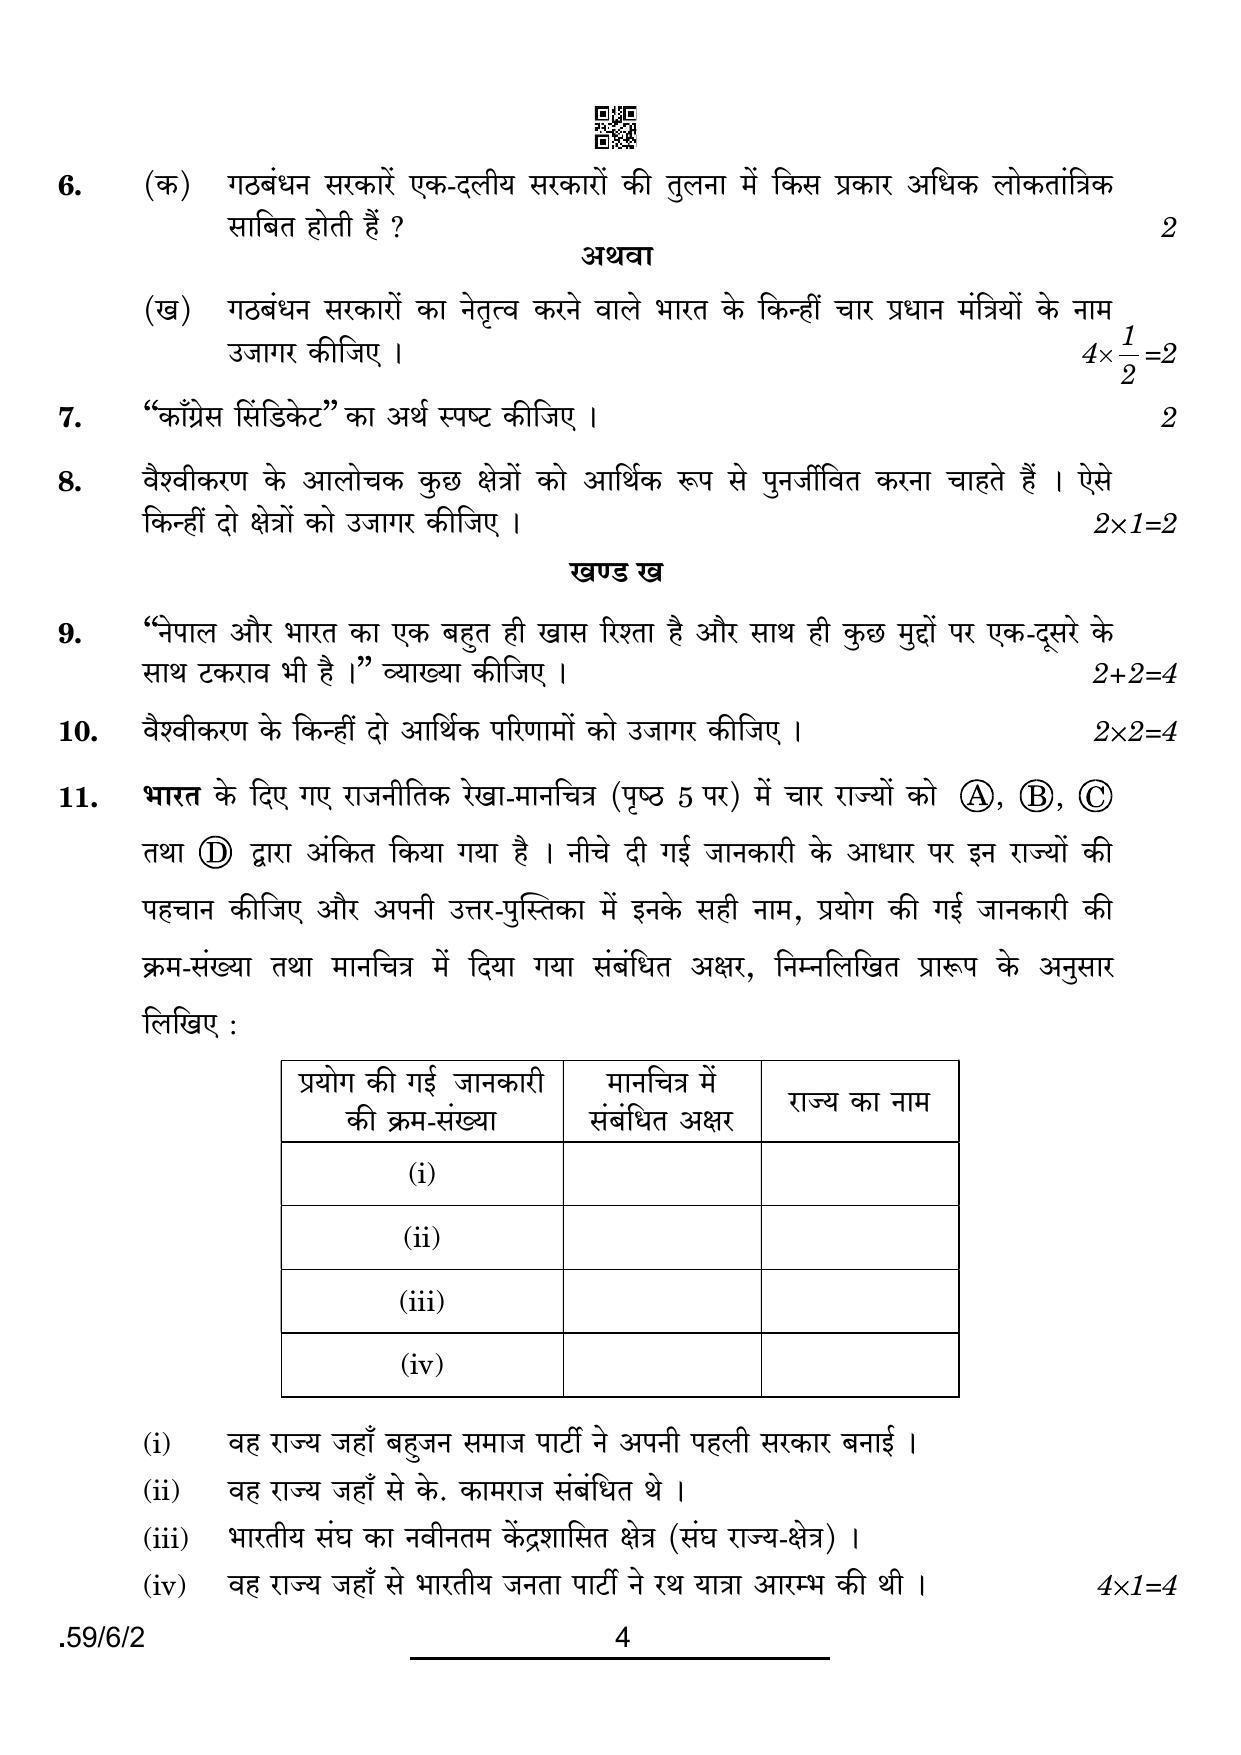 CBSE Class 12 59-6-2 POL SCIENCE 2022 Compartment Question Paper - Page 4